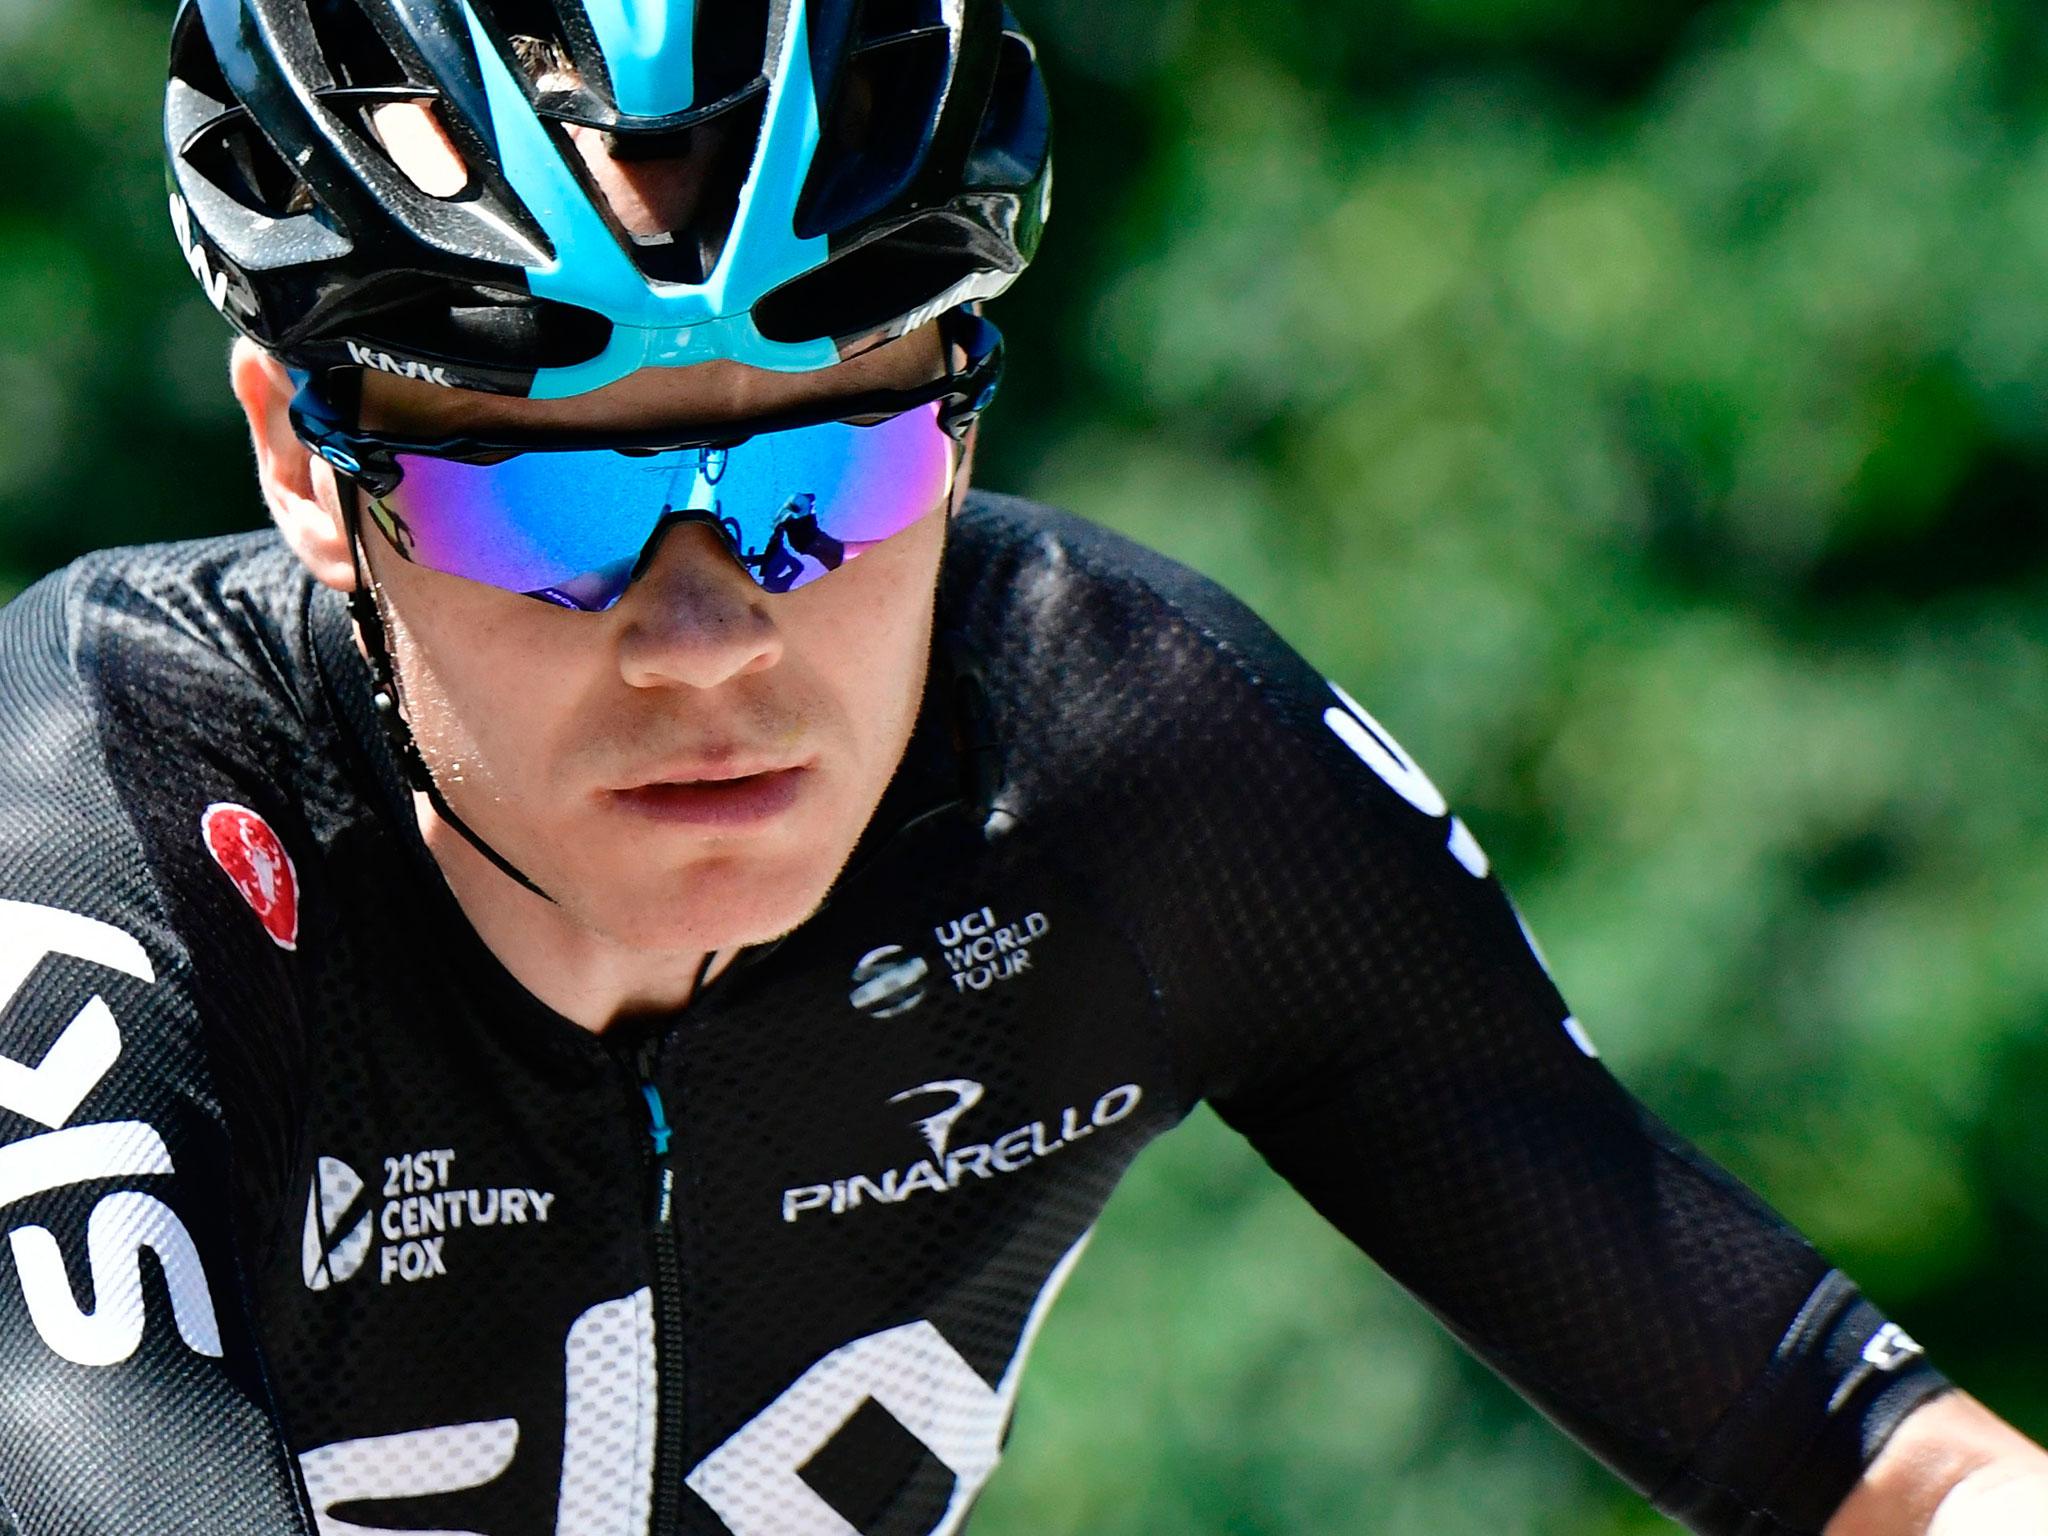 &#13;
Froome is eyeing a historic fourth Tour de France title &#13;